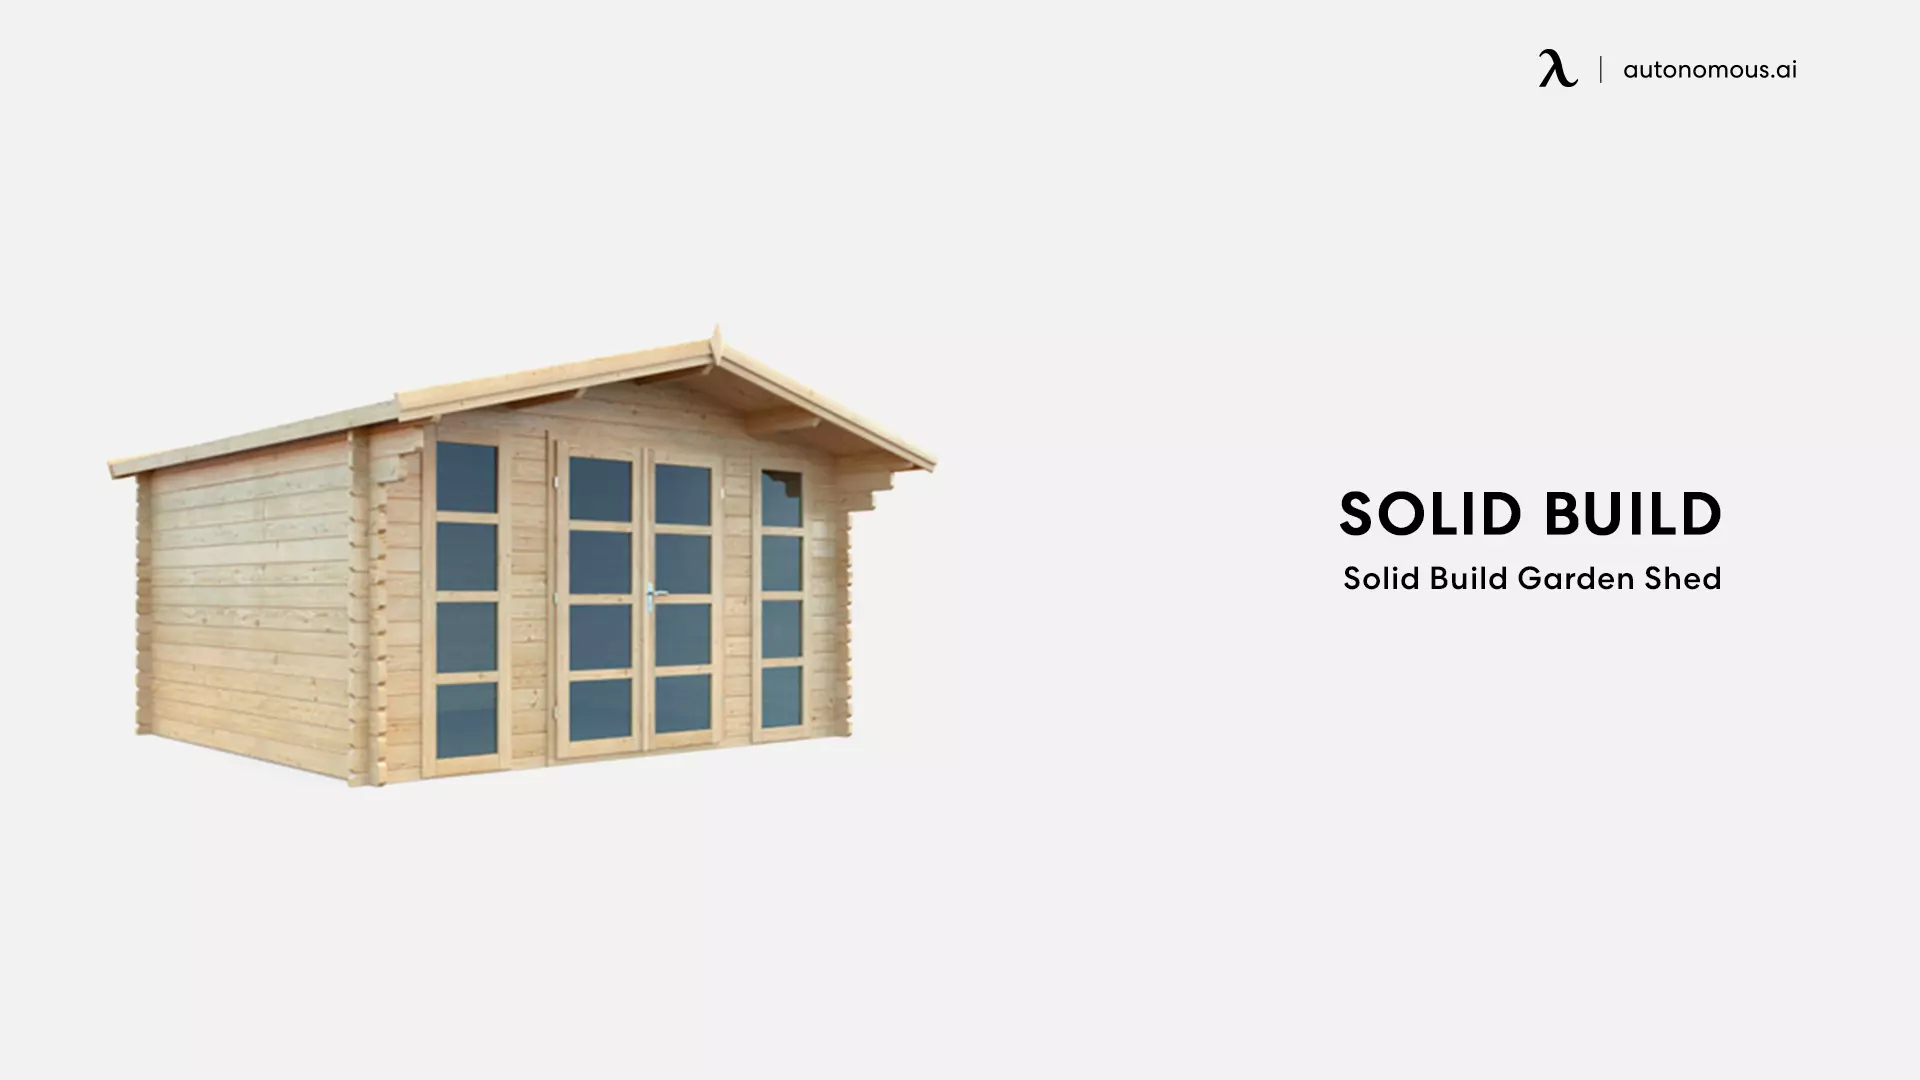 The Solid Build Garden Shed